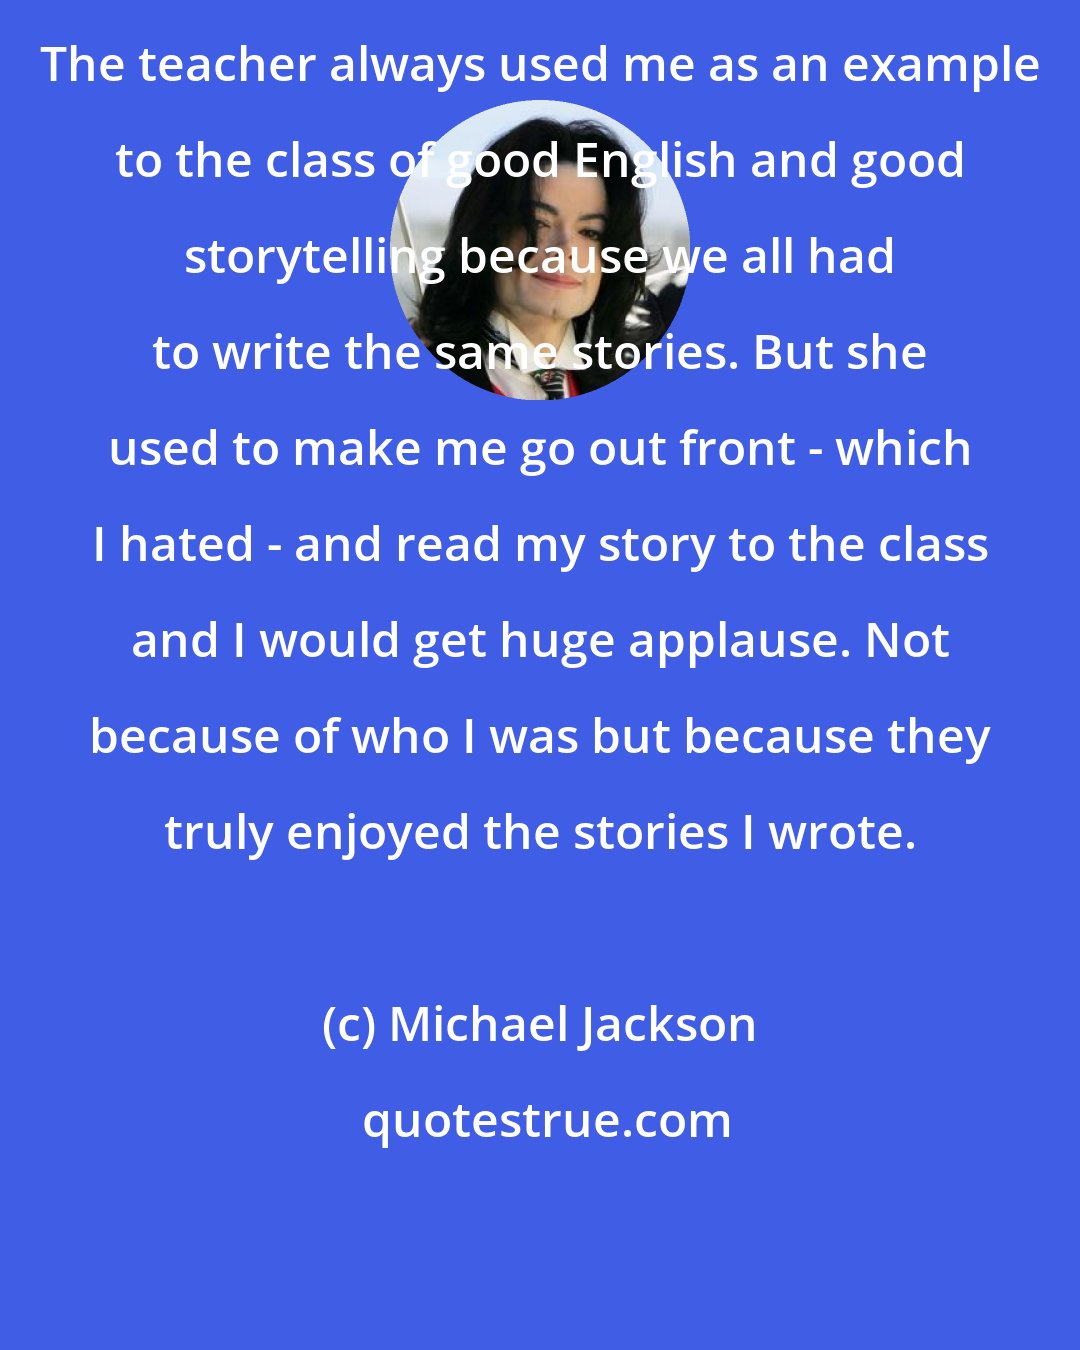 Michael Jackson: The teacher always used me as an example to the class of good English and good storytelling because we all had to write the same stories. But she used to make me go out front - which I hated - and read my story to the class and I would get huge applause. Not because of who I was but because they truly enjoyed the stories I wrote.